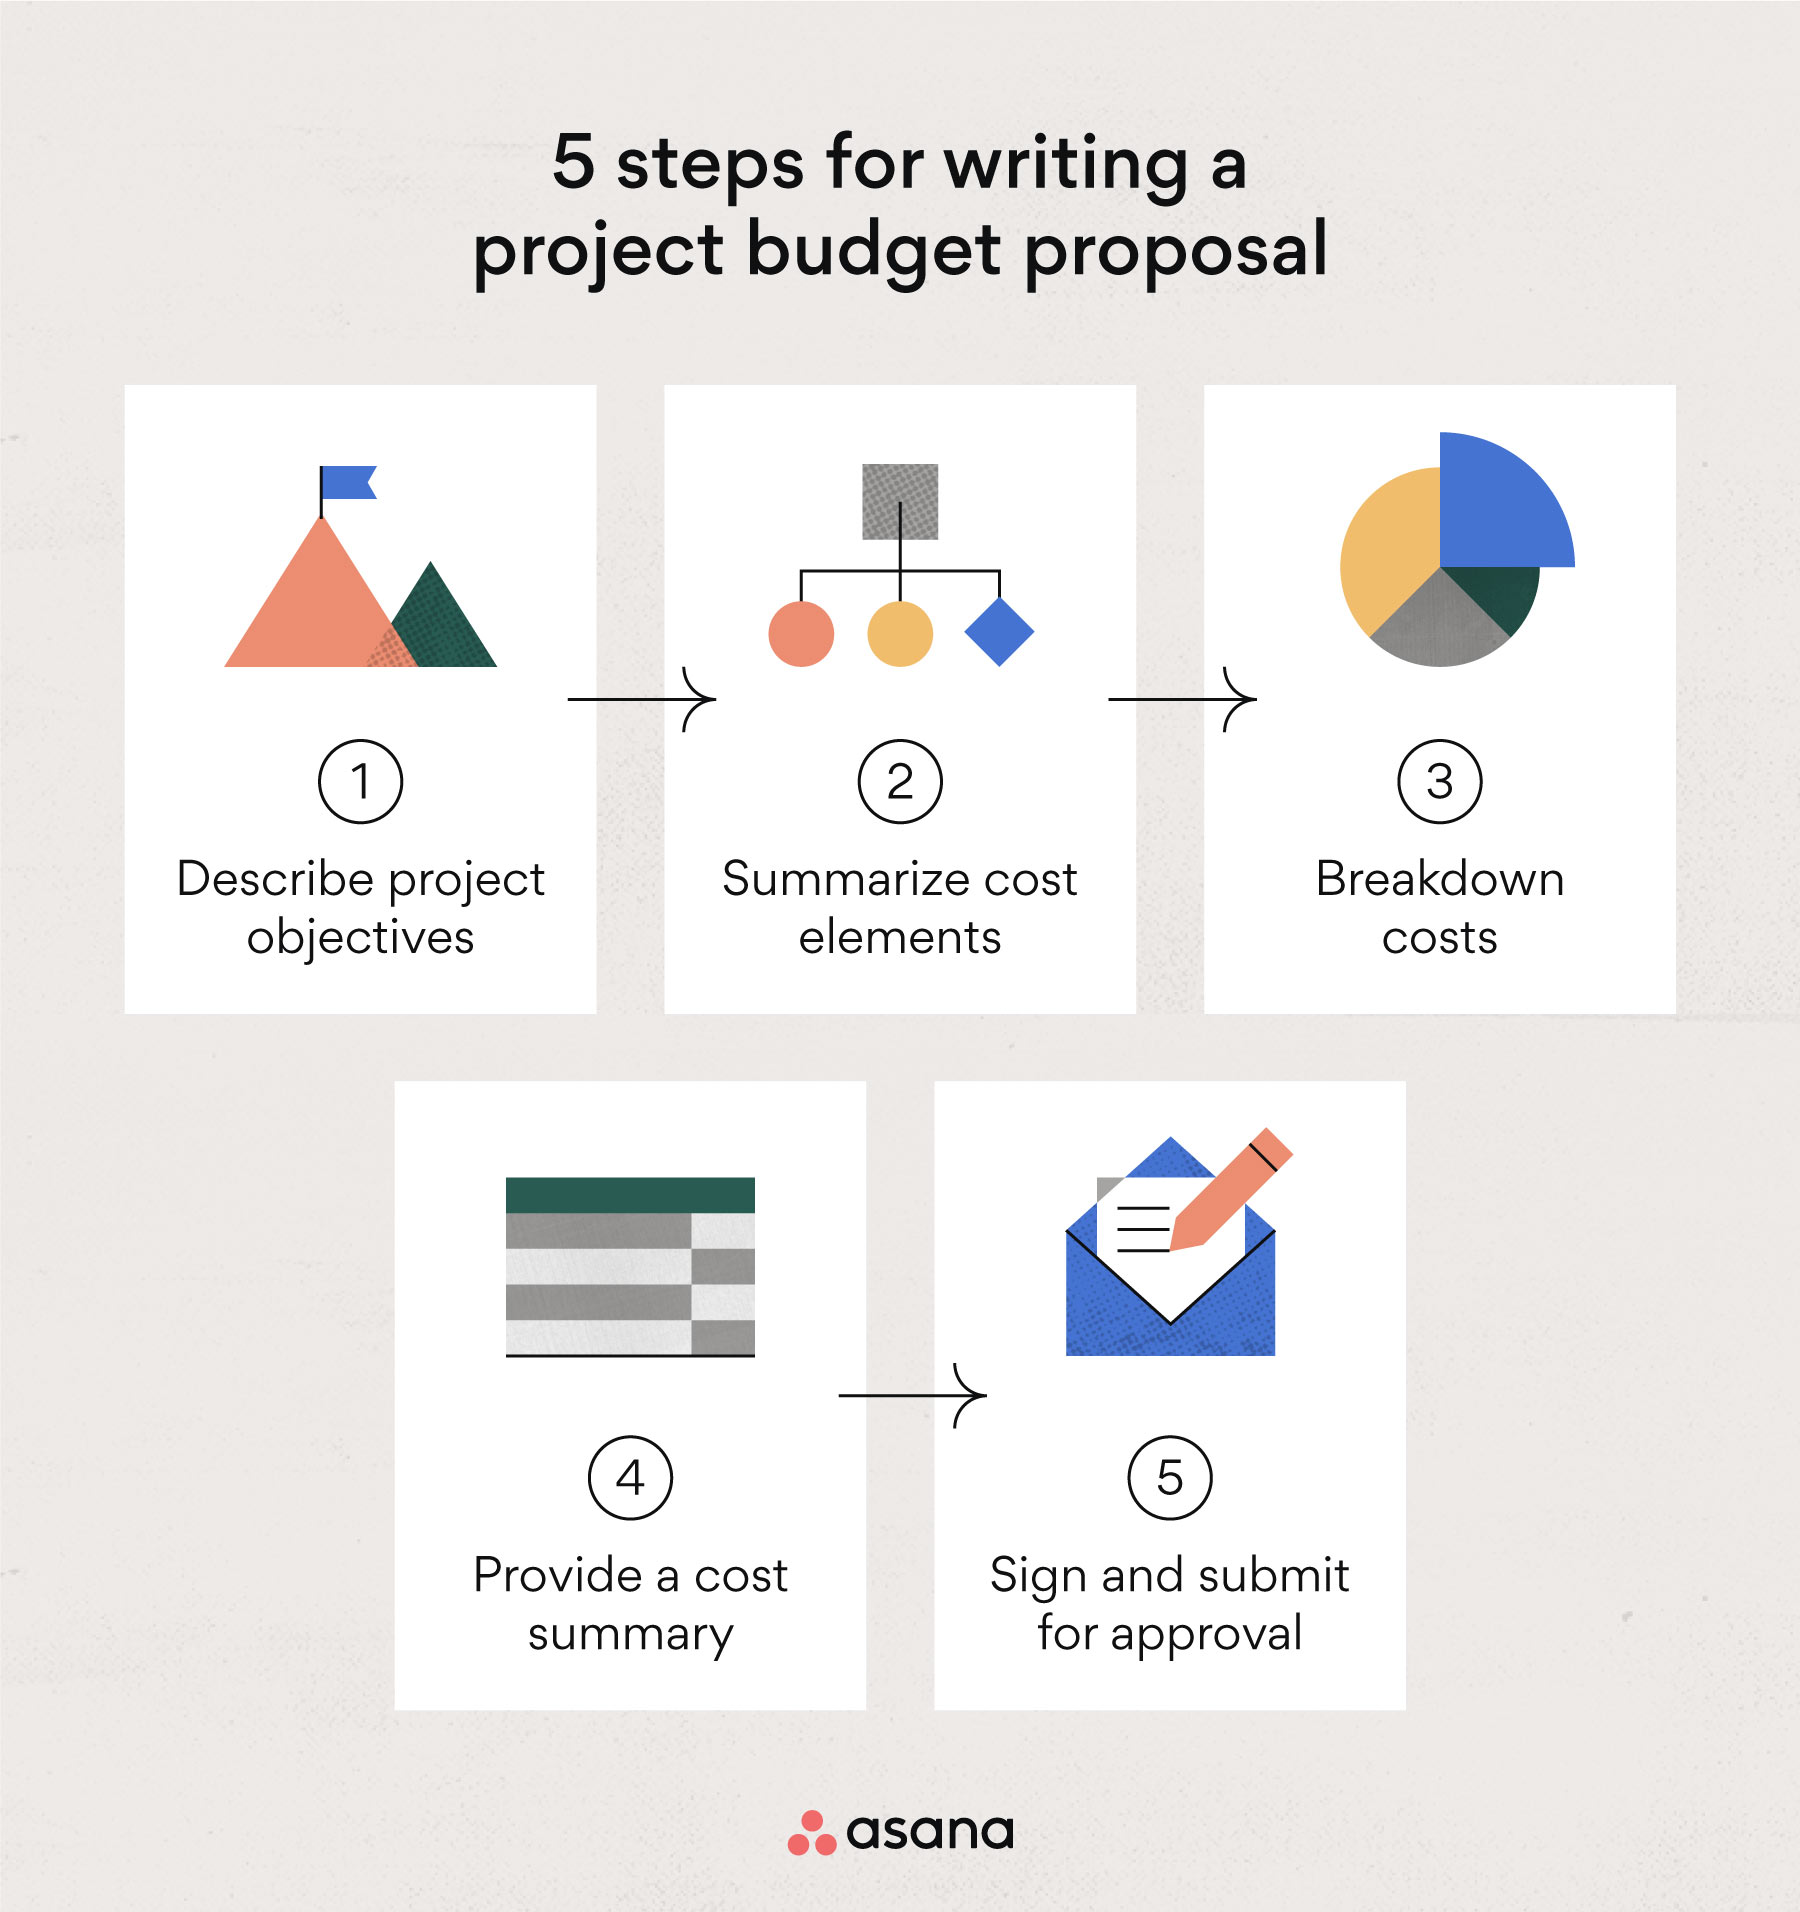 [inline illustration] 5 steps for writing a project budget proposal (infographic)